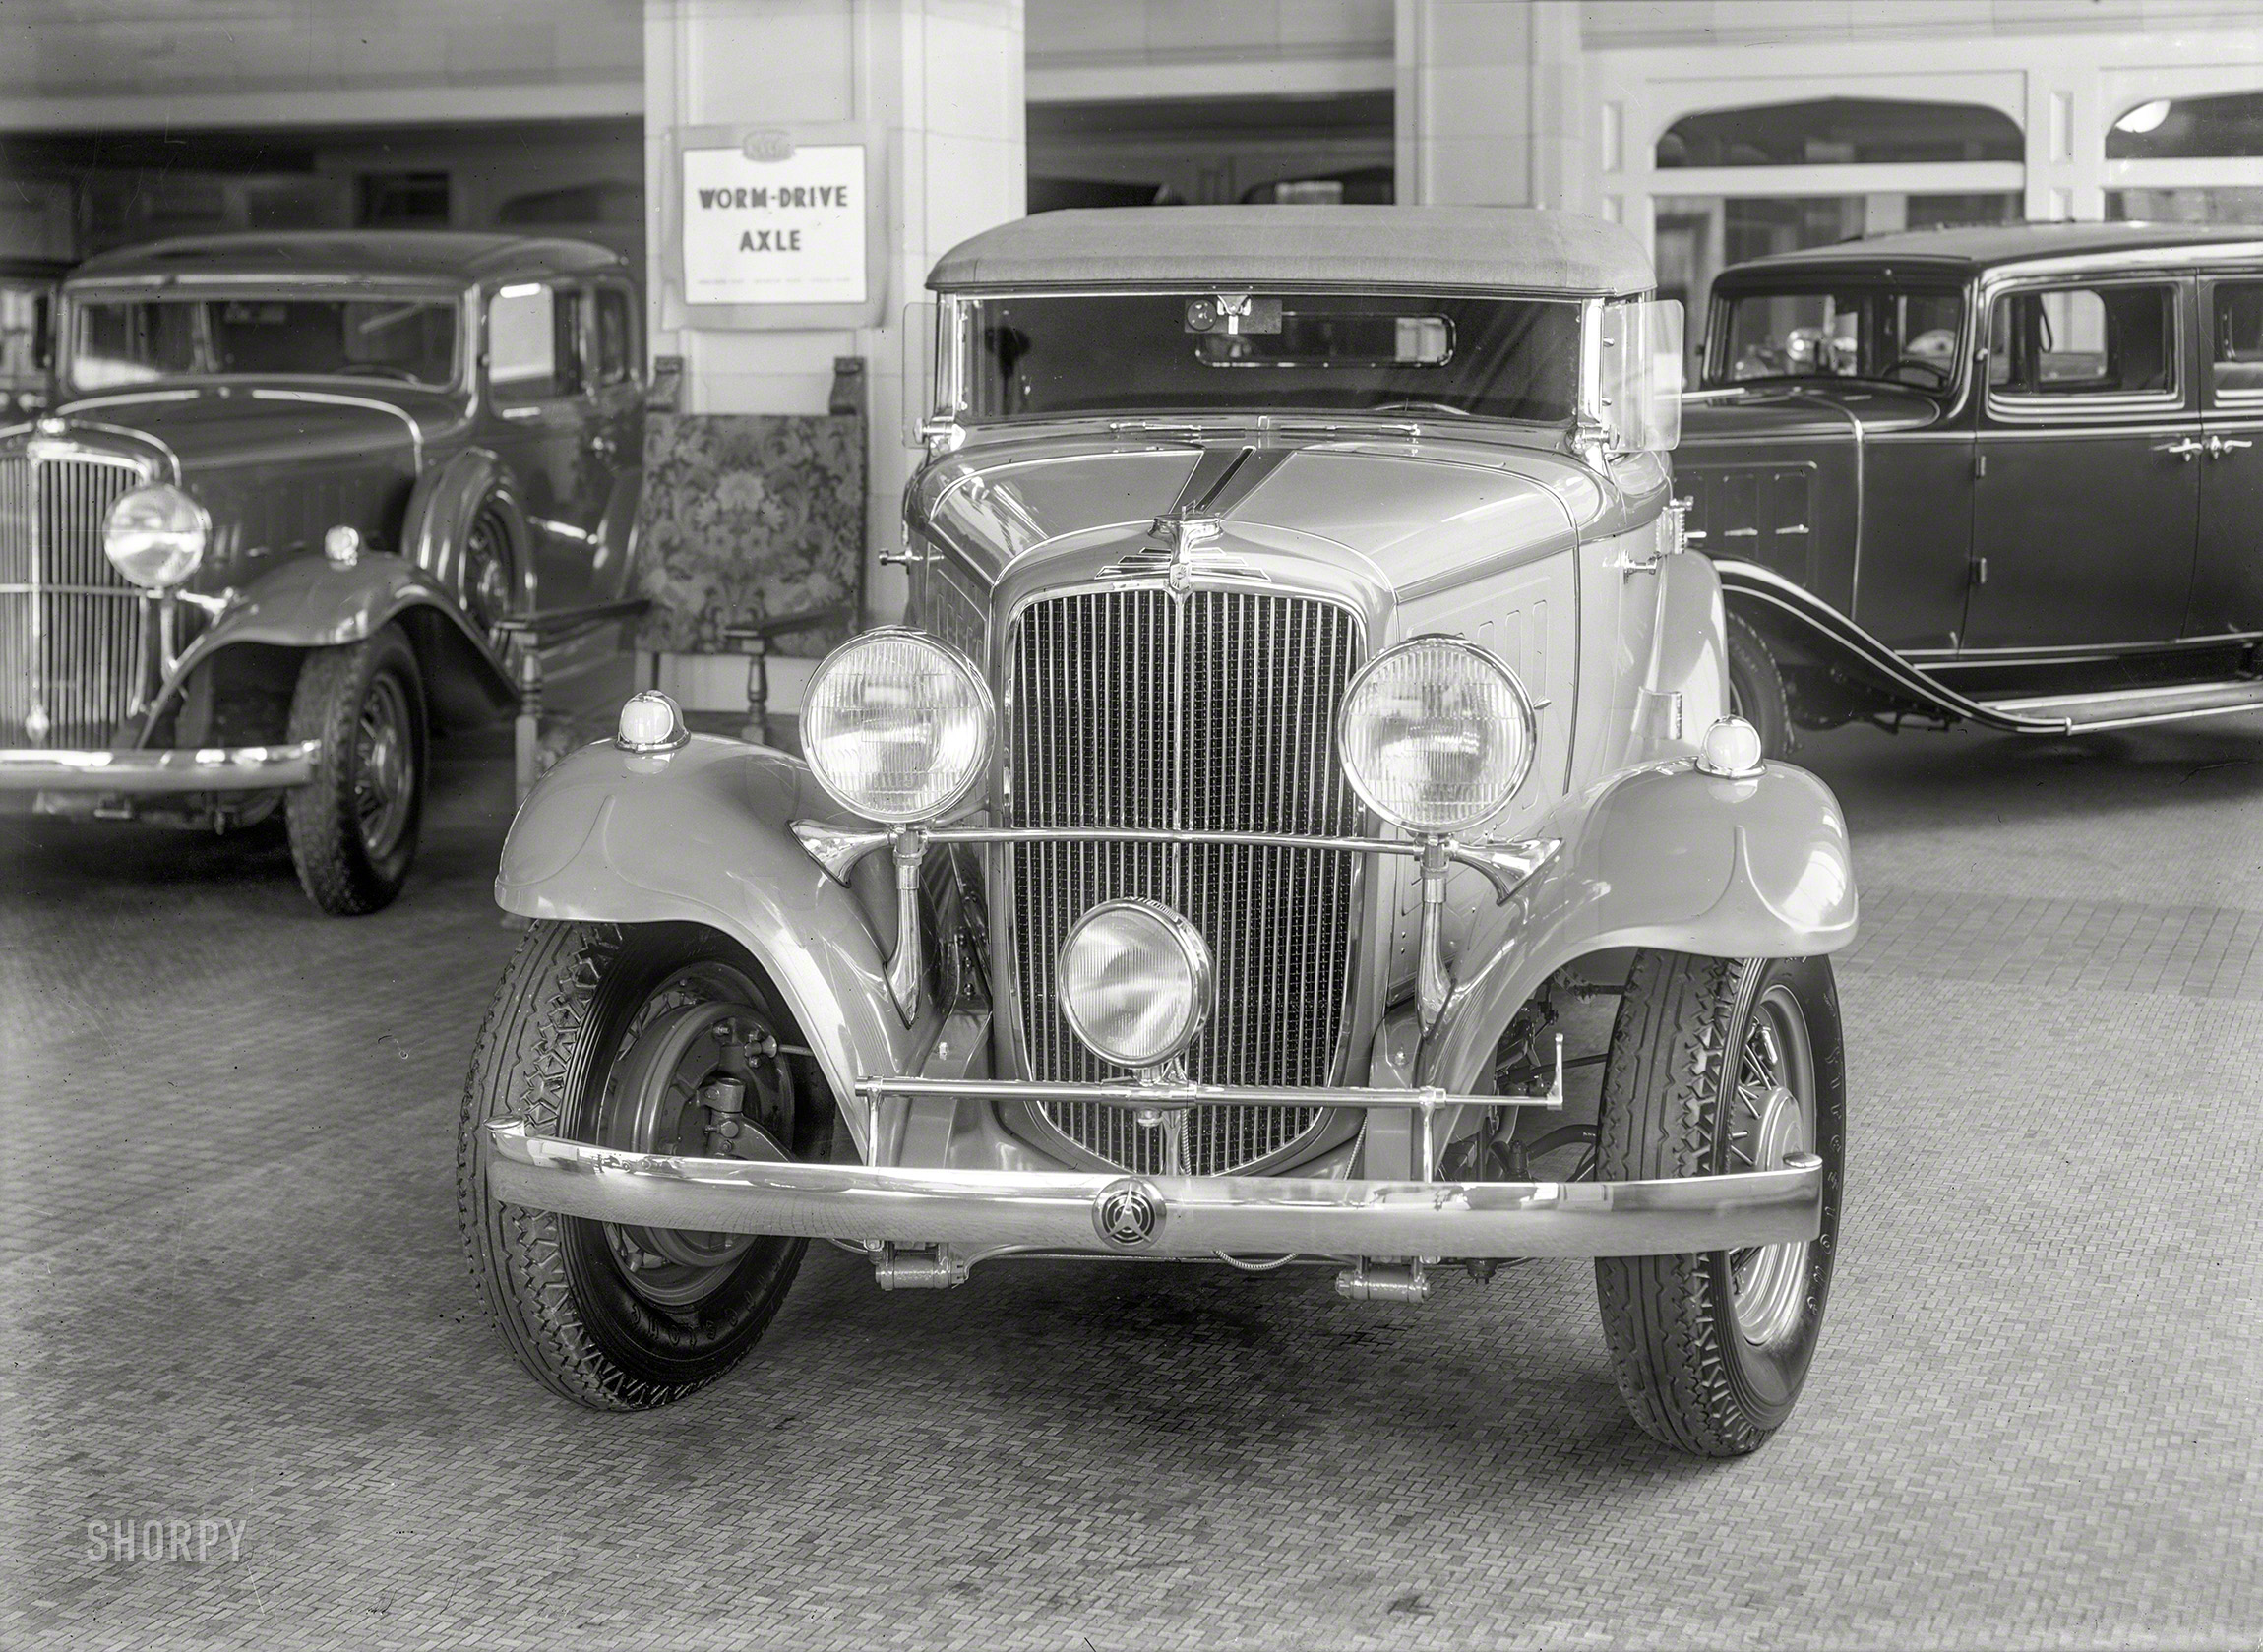 "Nash showroom, San Francisco, 1933." Where selling points include the Worm-Drive Axle and a center headlight that turns with the steering wheel. 5x7 inch dry plate glass negative by Christopher Helin. View full size.